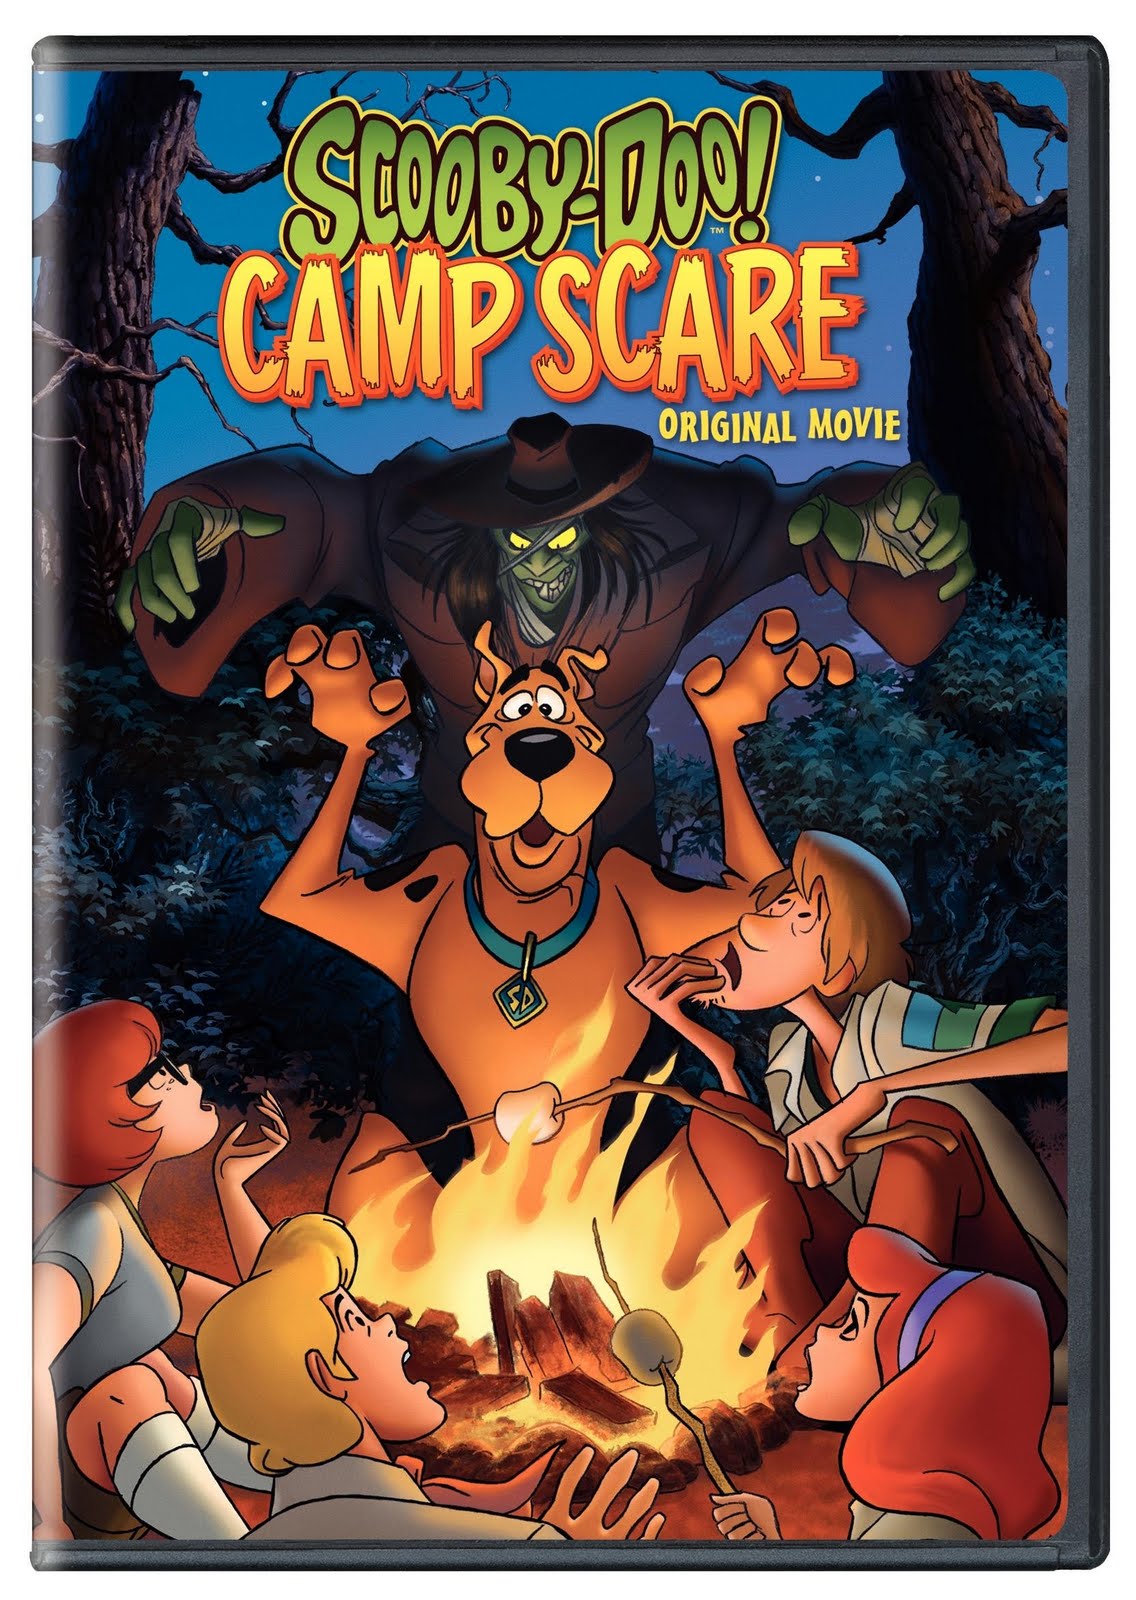        scooby doo camp scare 2010  DvdRip     Scooby+Doo+Camp+Scare+DVD